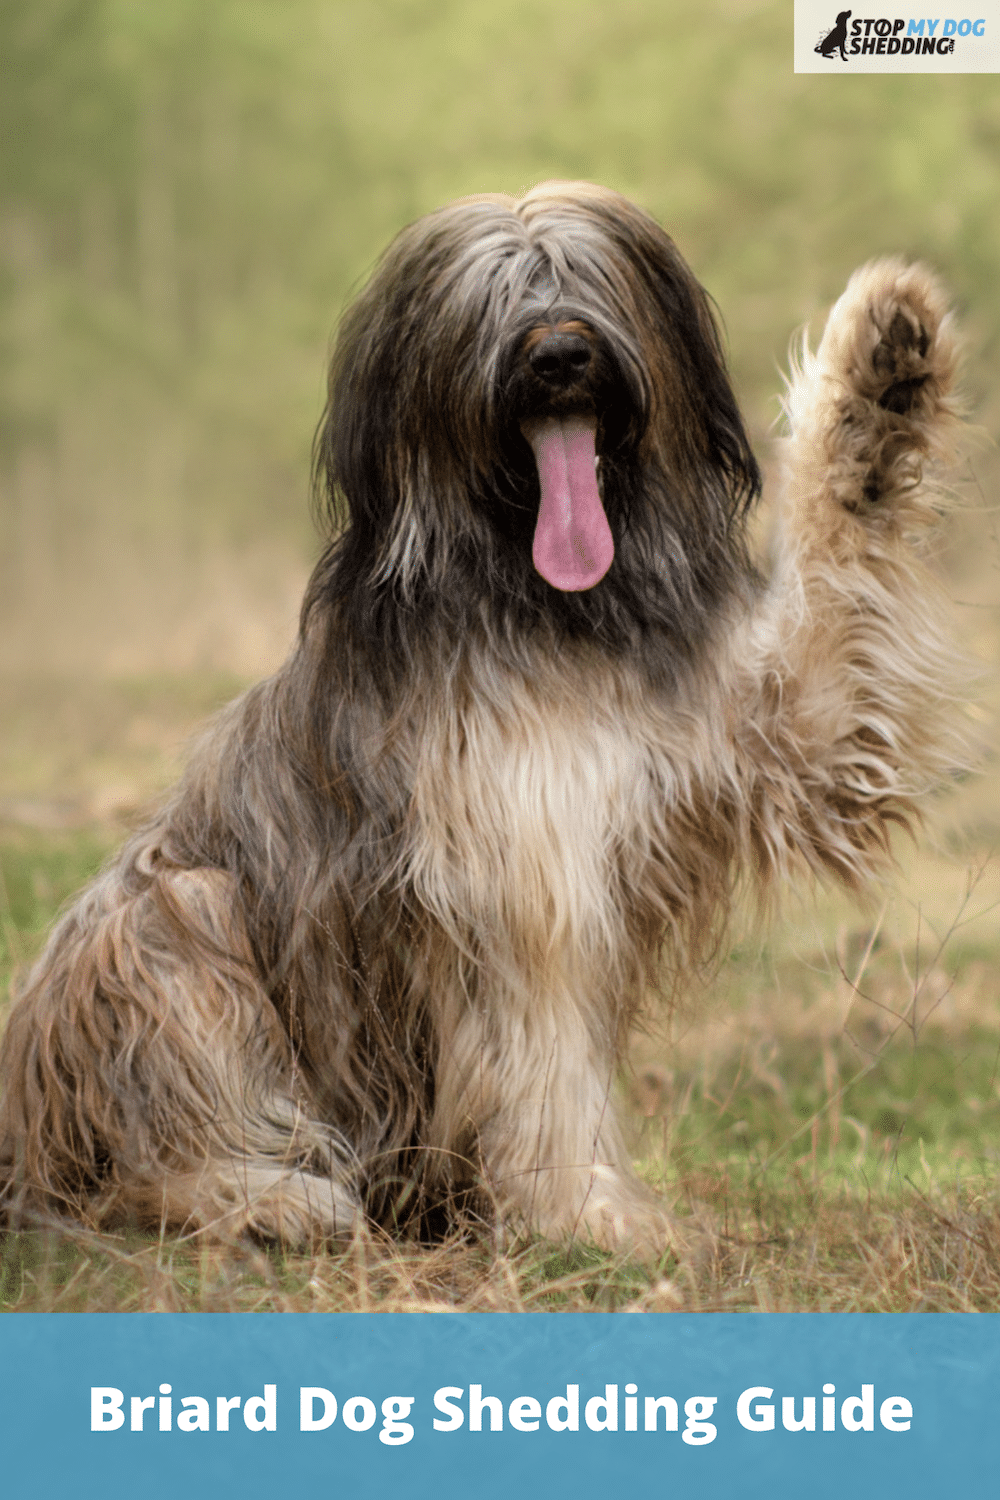 Do Briard Dogs Shed? (All You Need to Know)